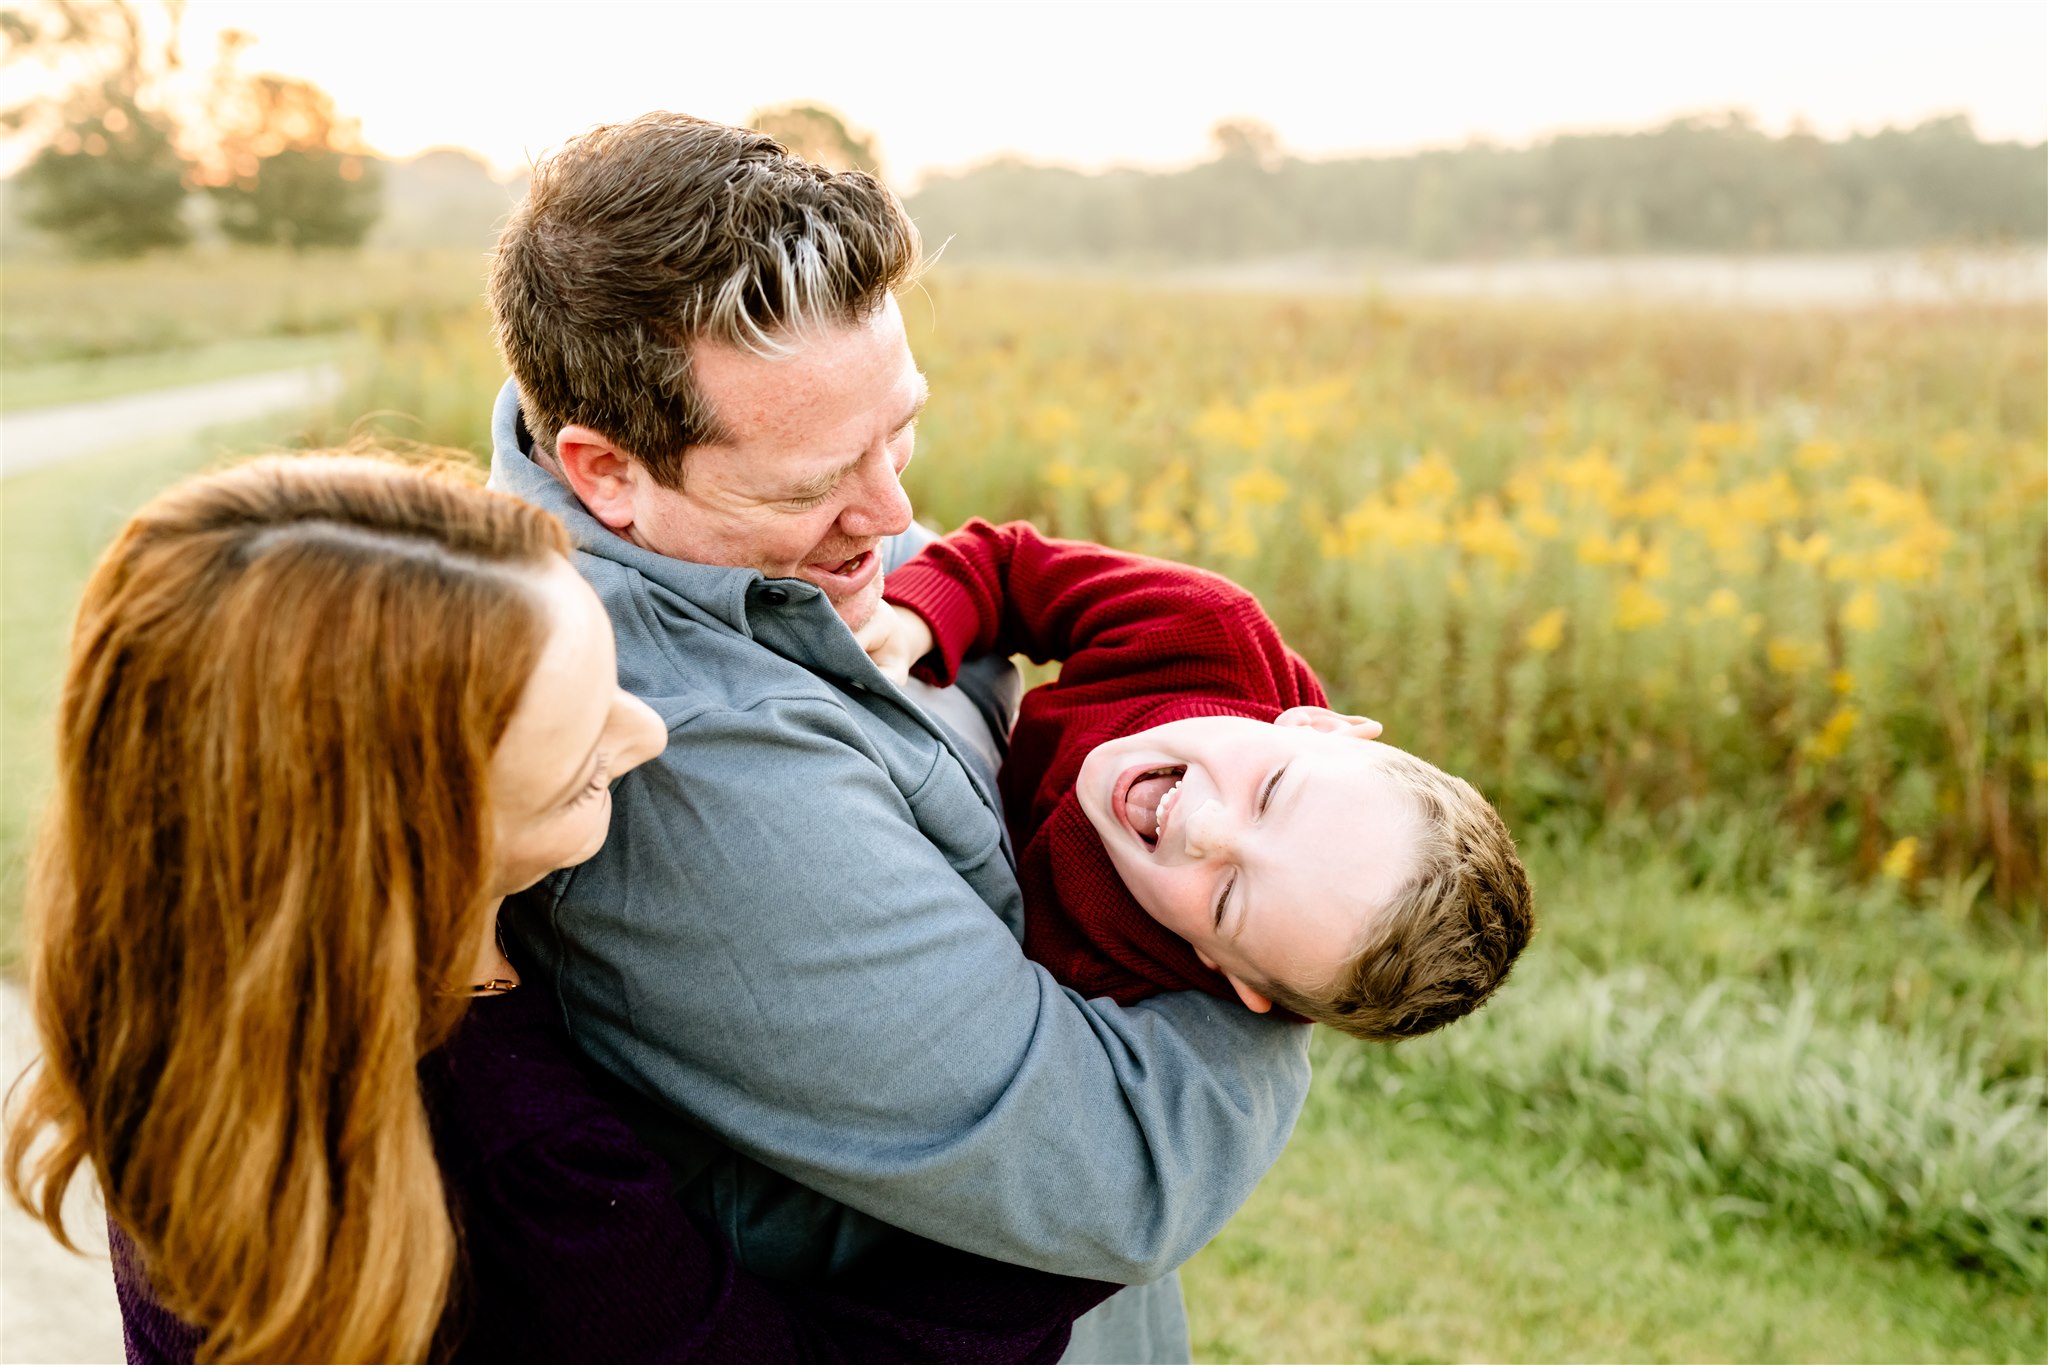 A mom and dad play with their ticklish son in a park path through wildflowers at sunset after visiting Montessori Schools in Chicago Suburbs